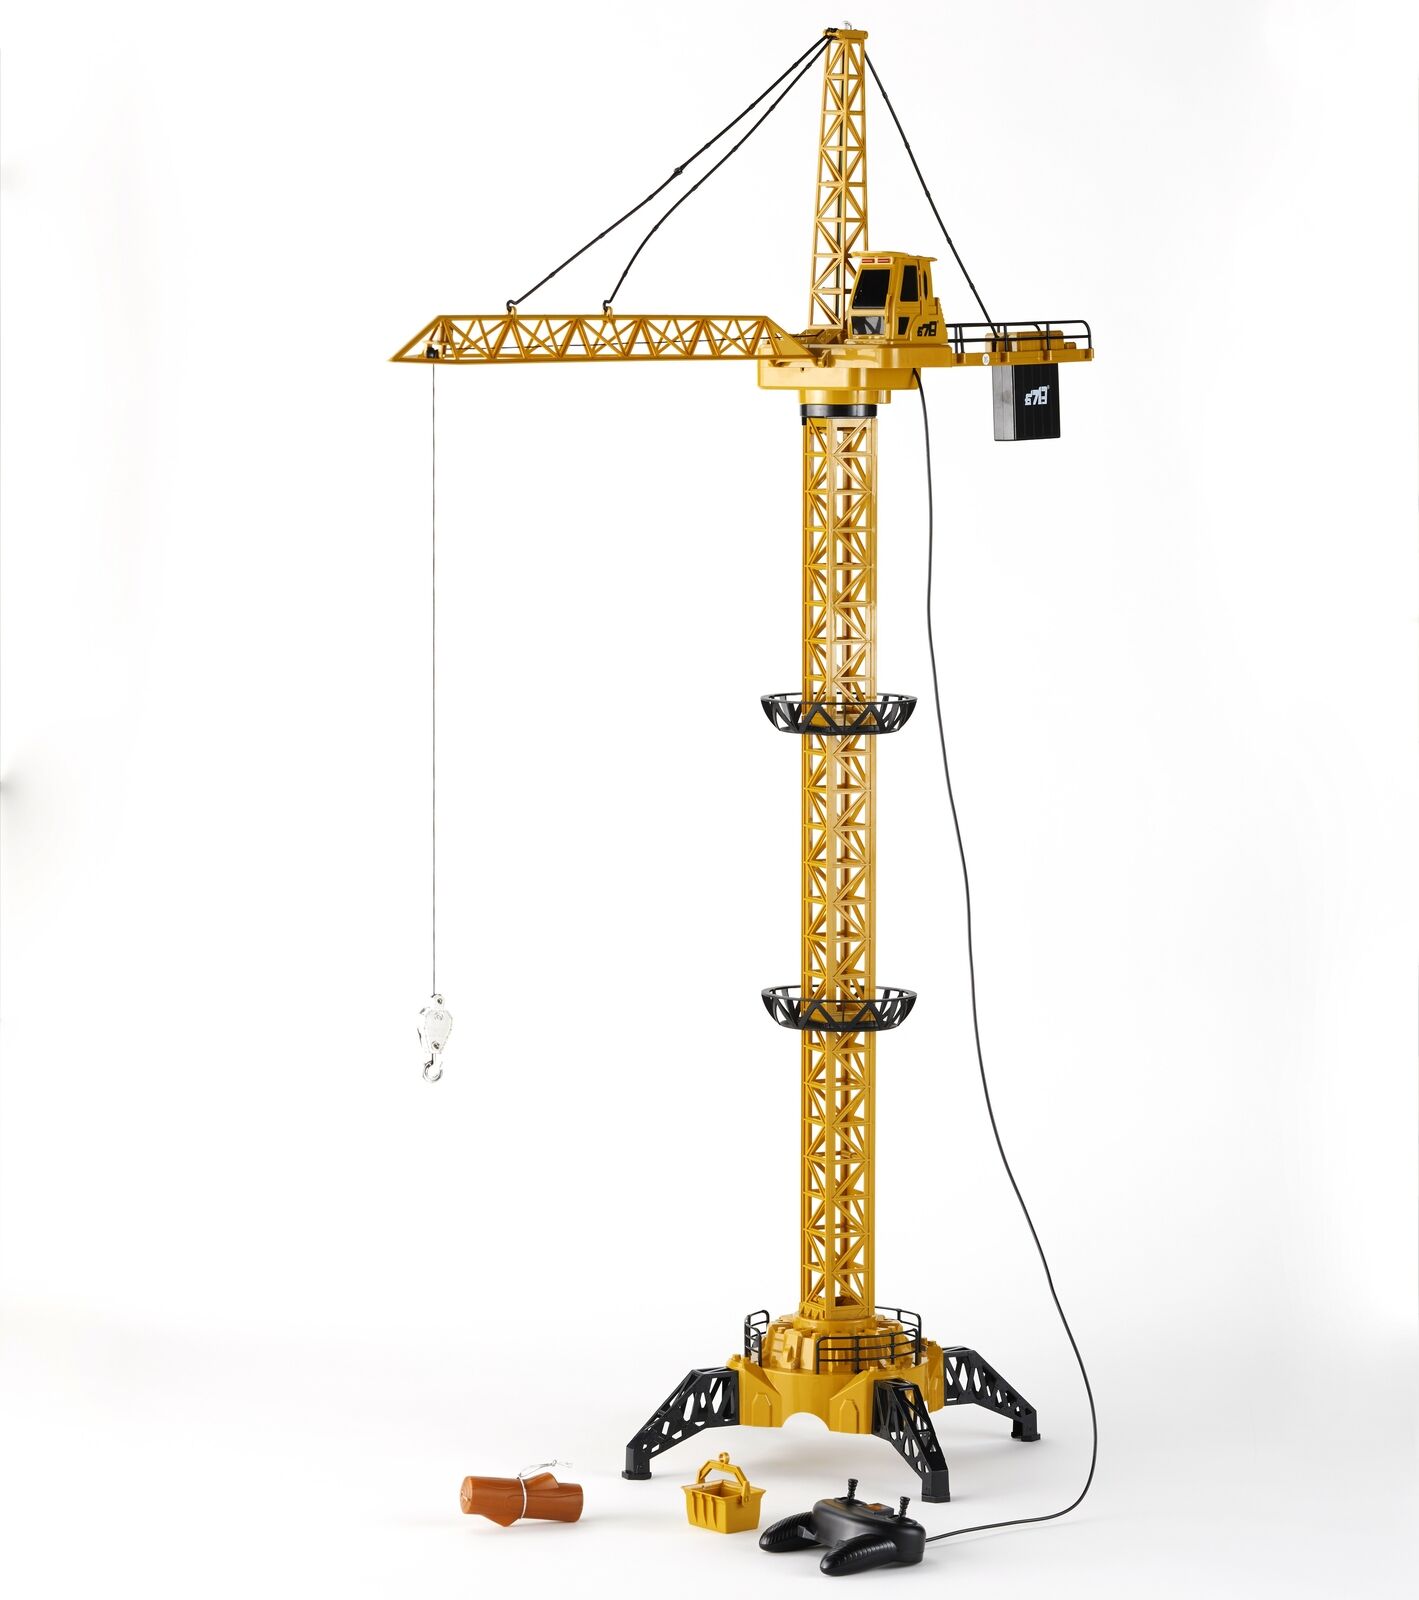 Remote Controlled Crane Toy And Building Supplies Set - Ages 3 And Up